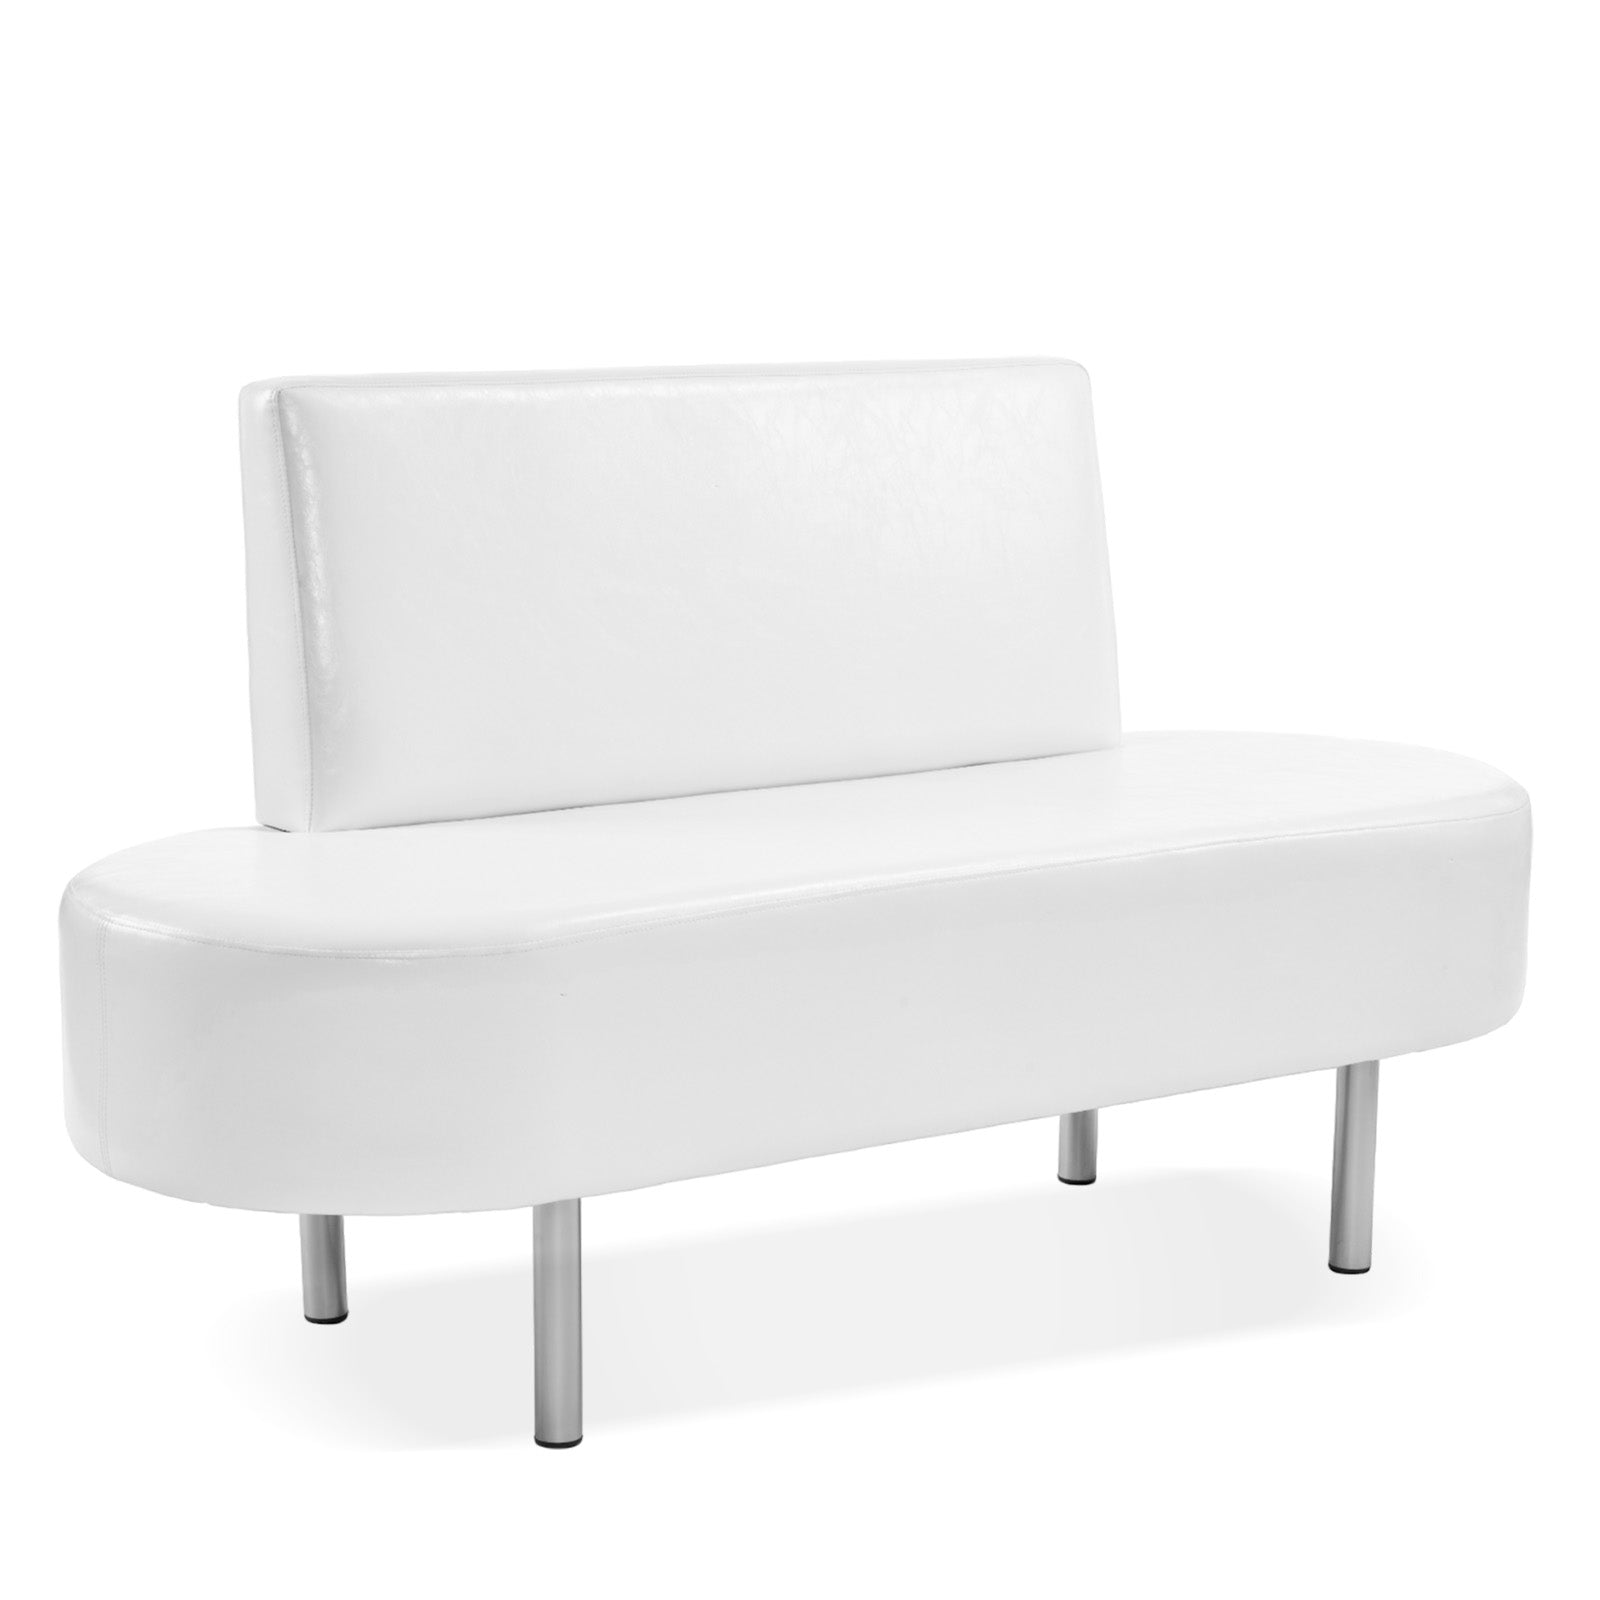 OmySalon Waiting Room Chairs with Backrest Reception Room Bench Salon